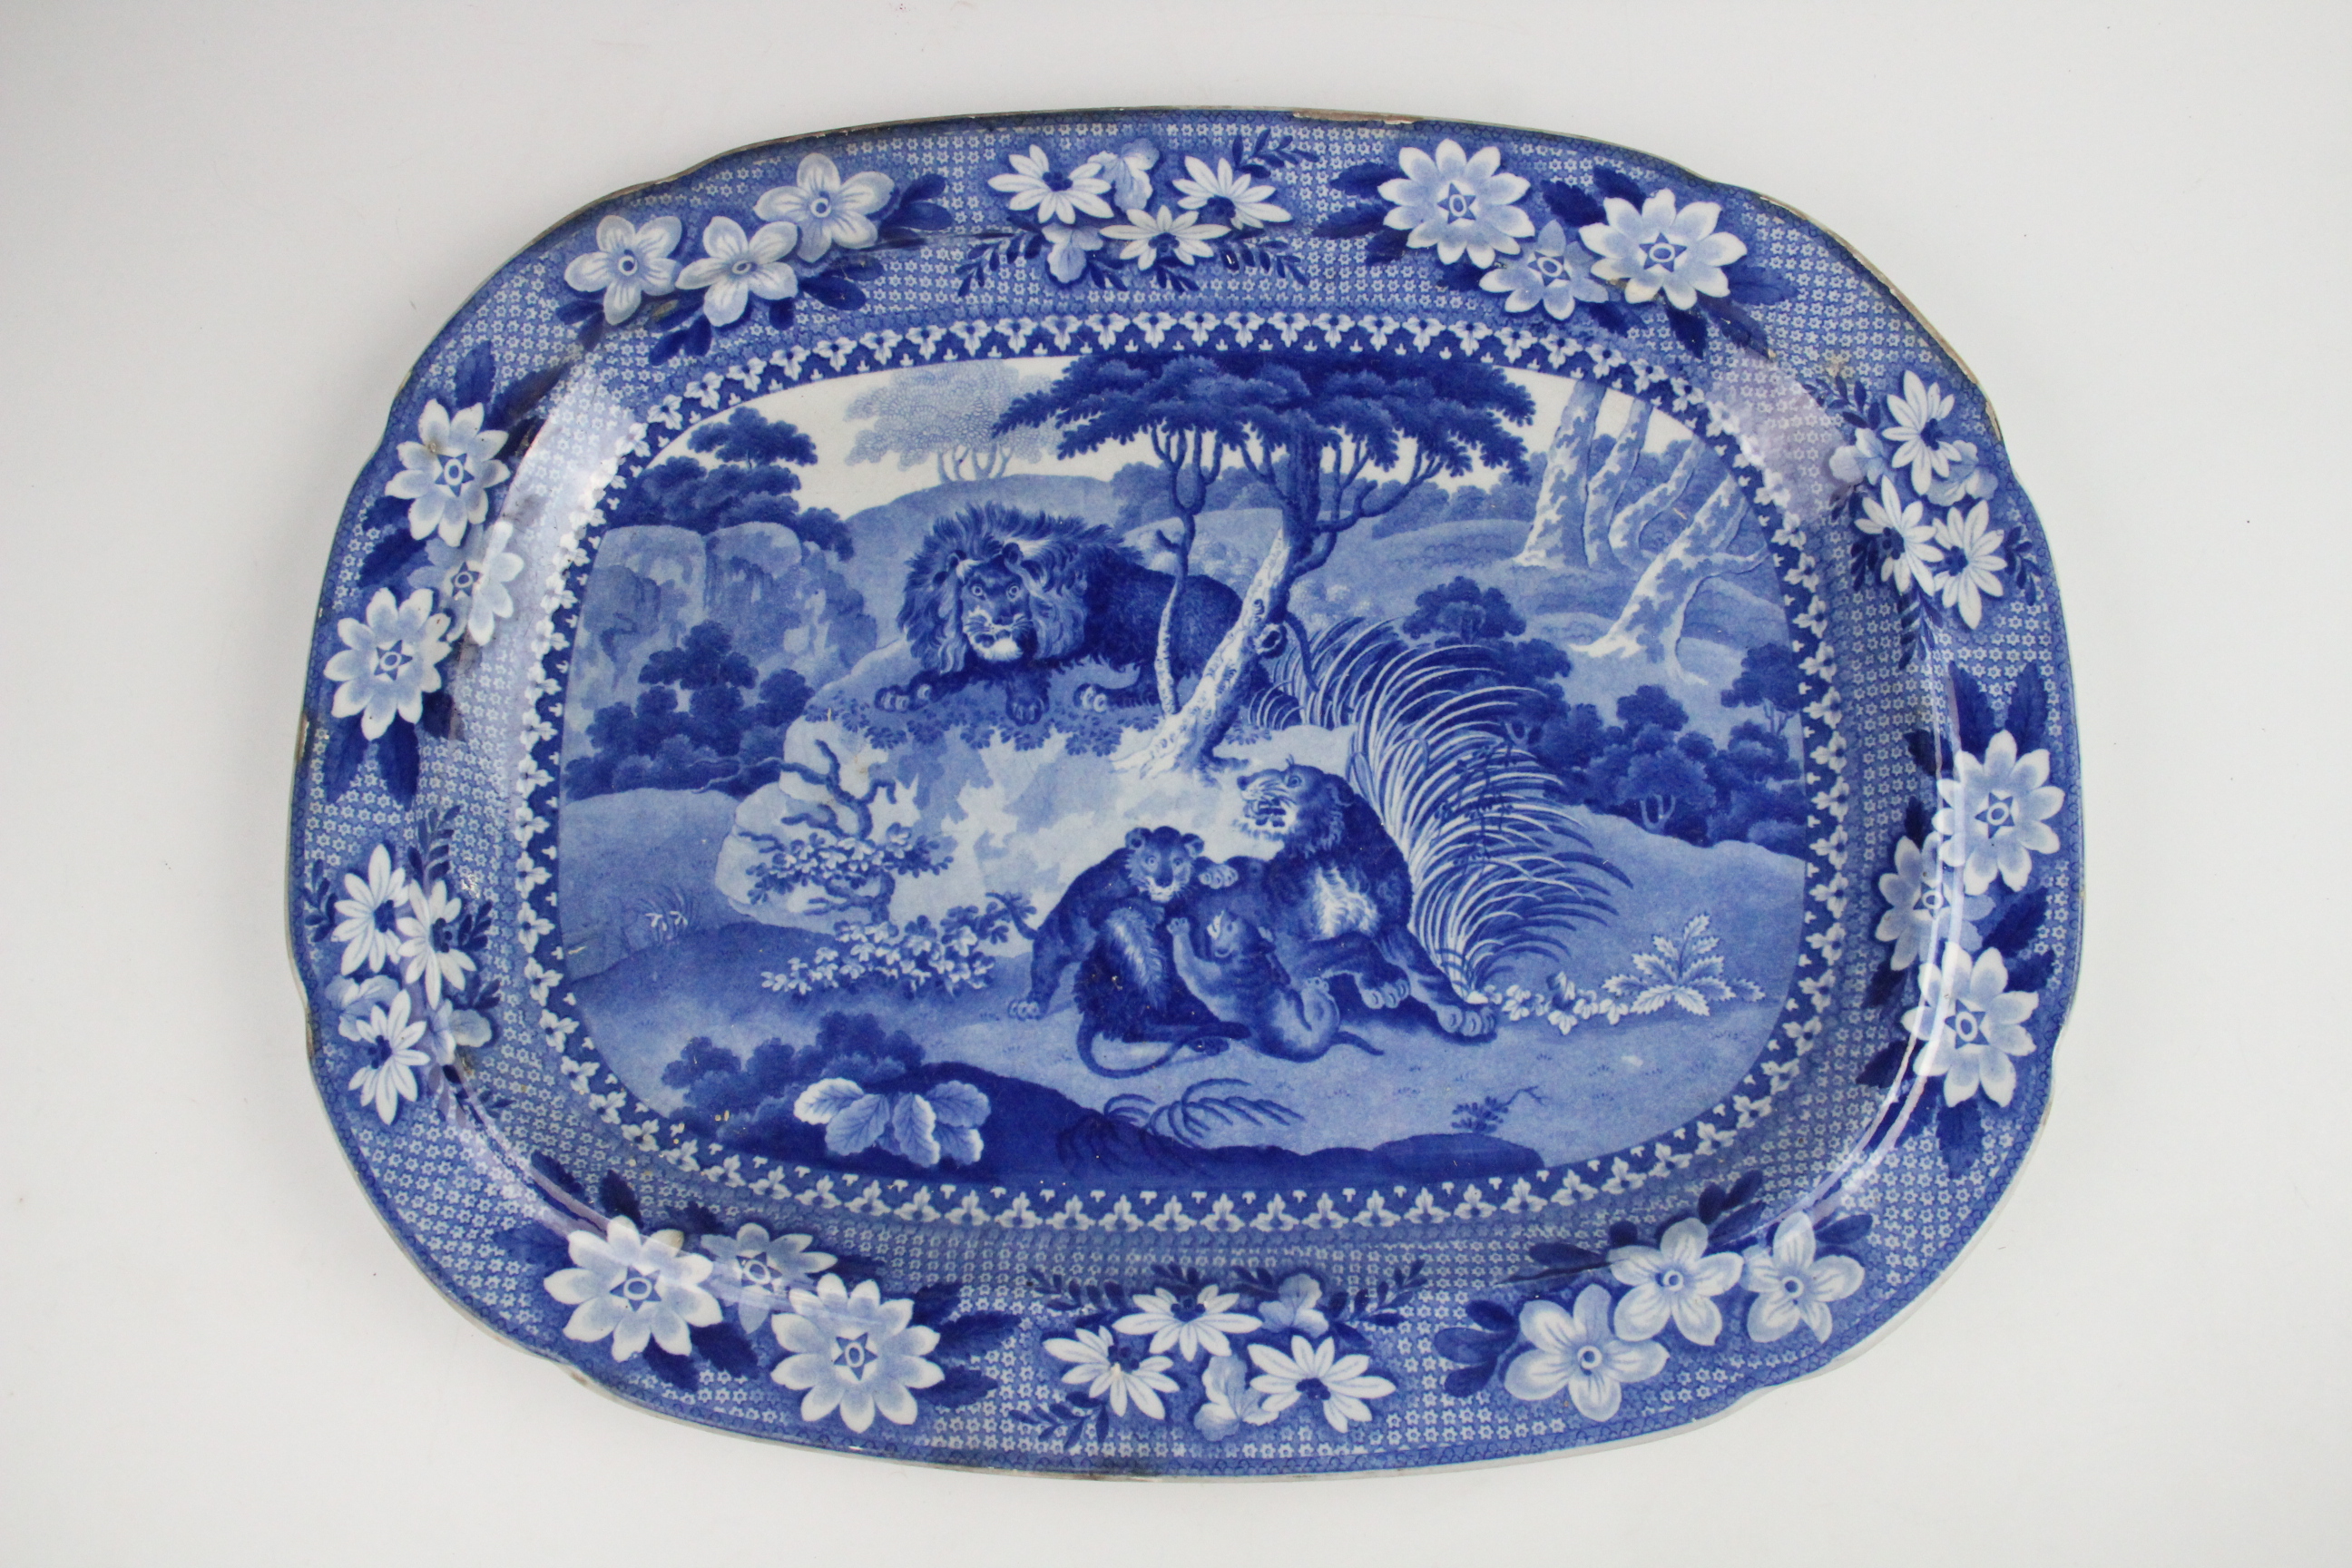 An Adams blue and white pearlware meat plate, 19th century, transfer printed with lions in a - Image 5 of 8